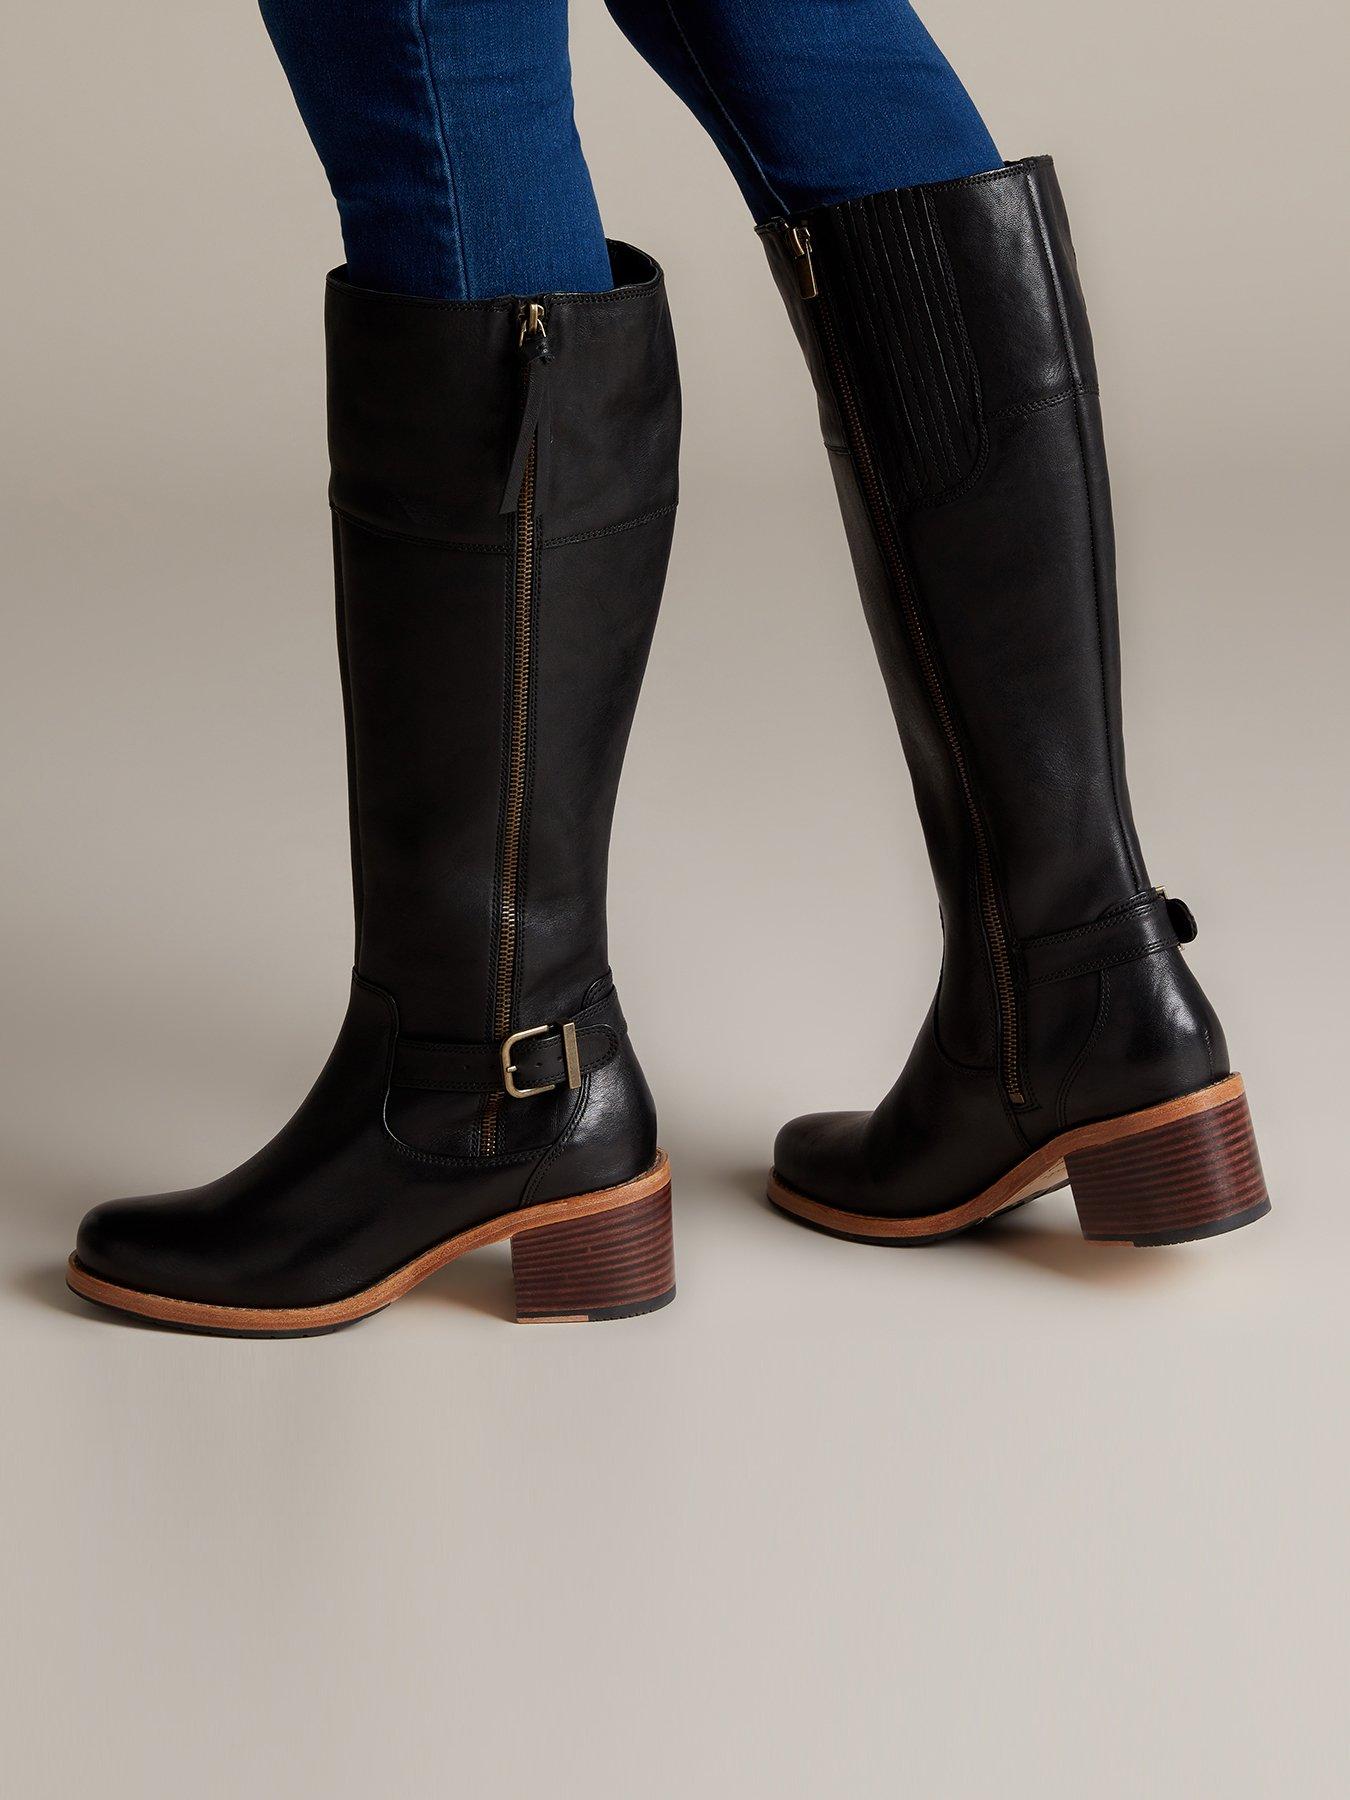 Clarks Clarkdale Sona Knee High Boot 